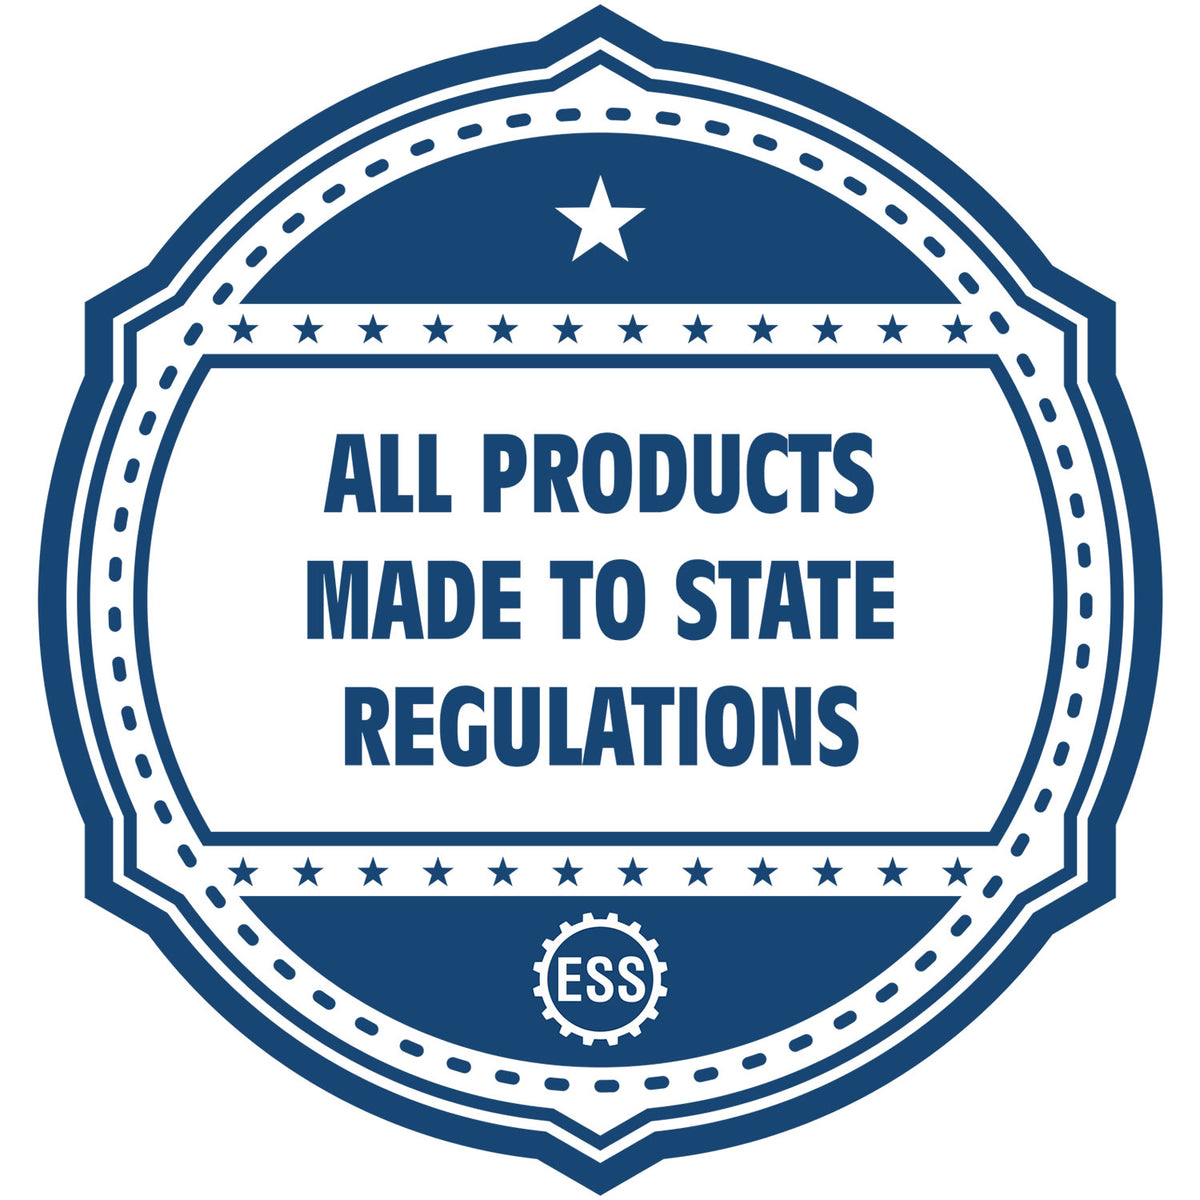 An icon or badge element for the Super Slim Indiana Notary Public Stamp showing that this product is made in compliance with state regulations.